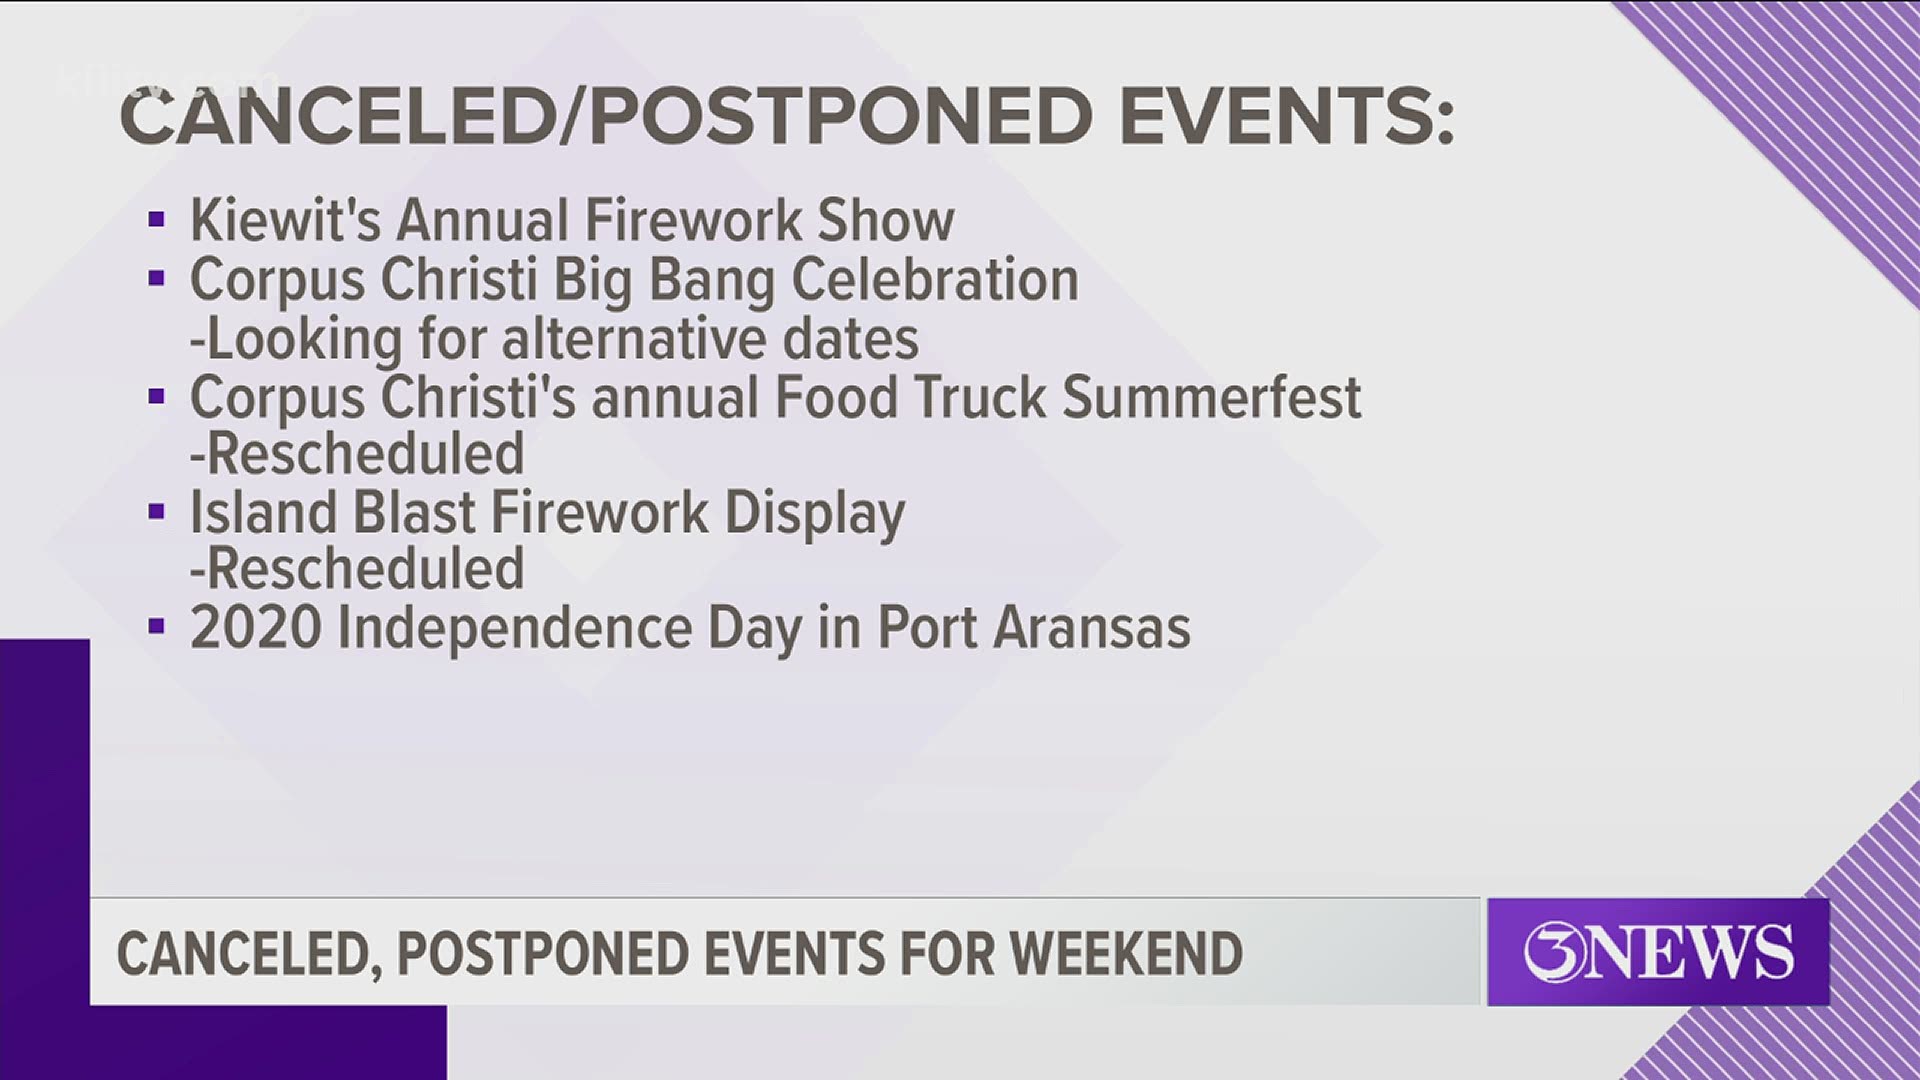 Several Coastal Bend cities have opted to cancel or postpone their Independence Day celebrations due to the dramatic increase of COVID-19 cases in South Texas.